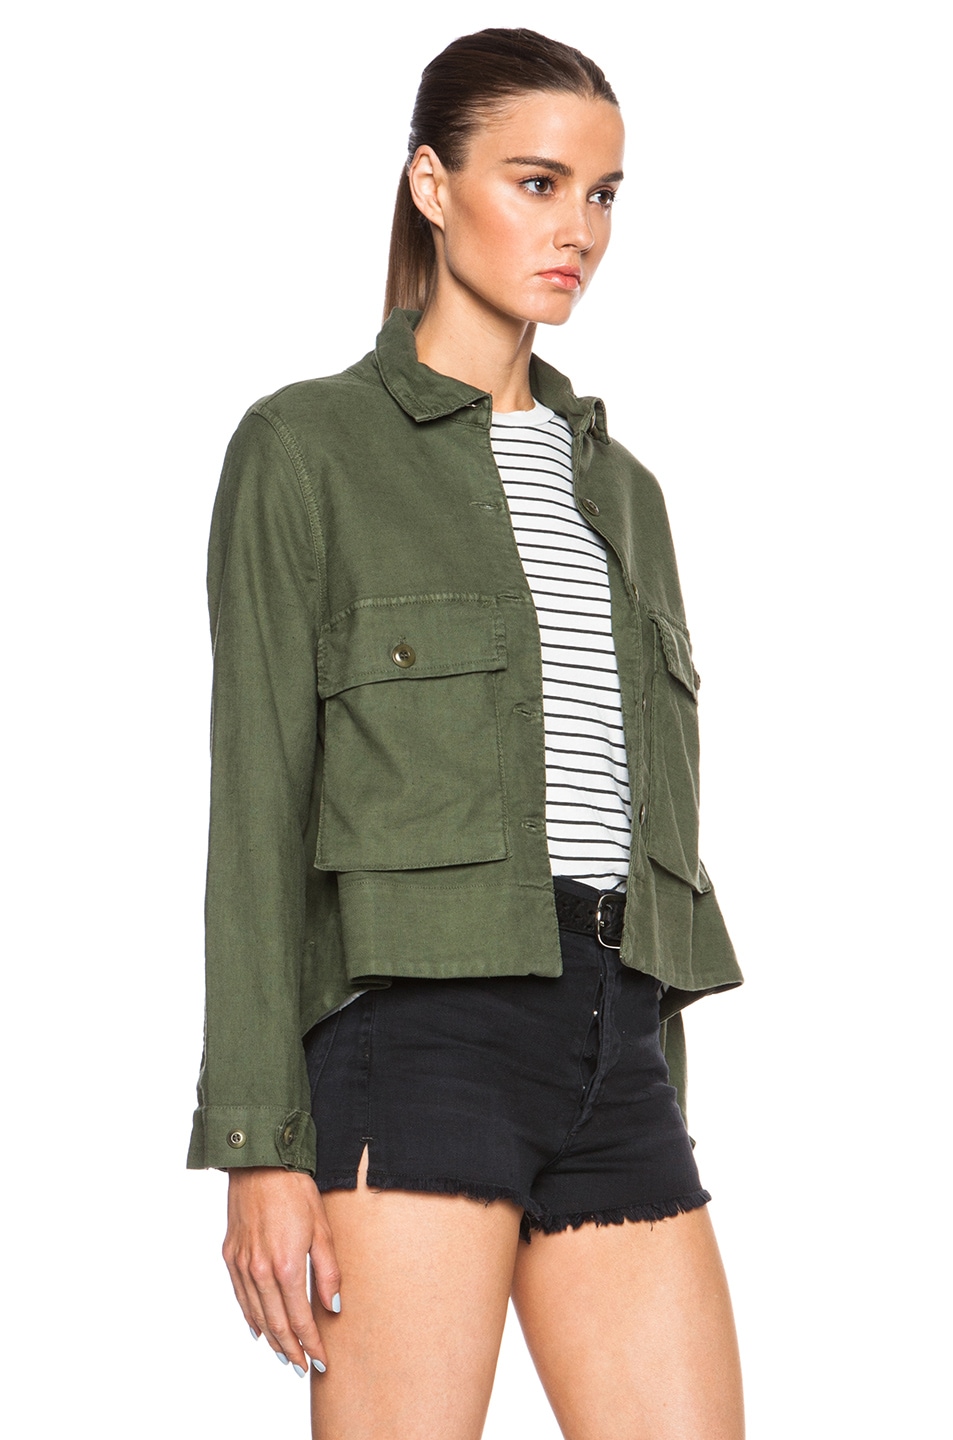 The Great Swingy Army Jacket in Beat Up Army | FWRD